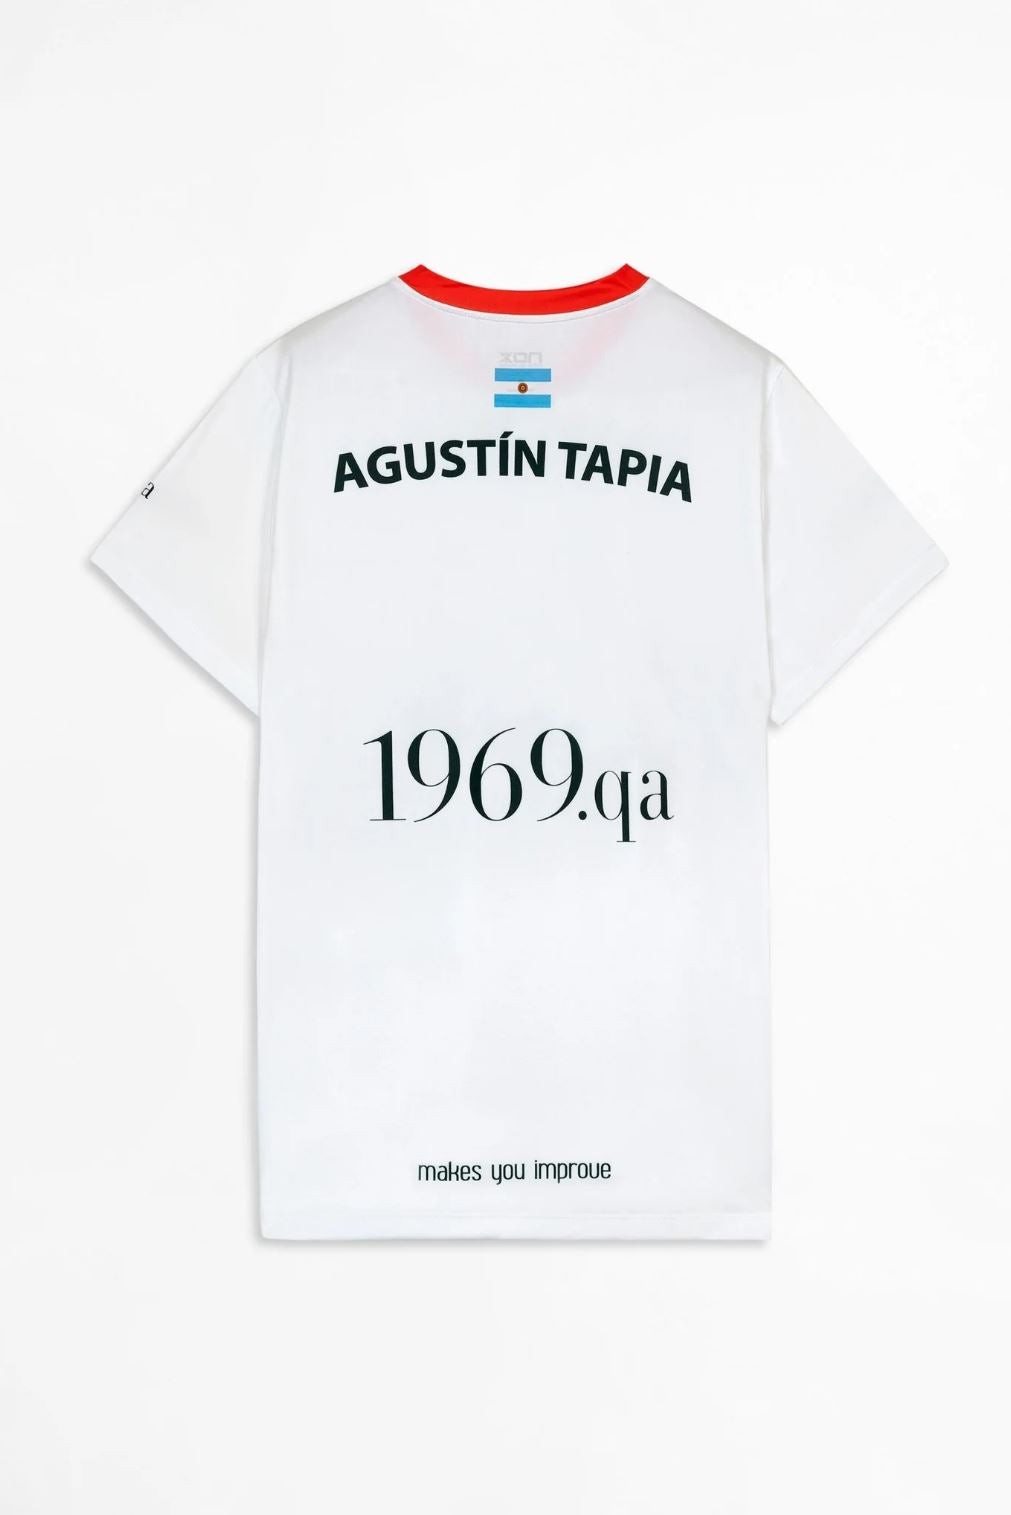 Nox Agustin Tapia Official Padel T-Shirt 2022/23 (White)